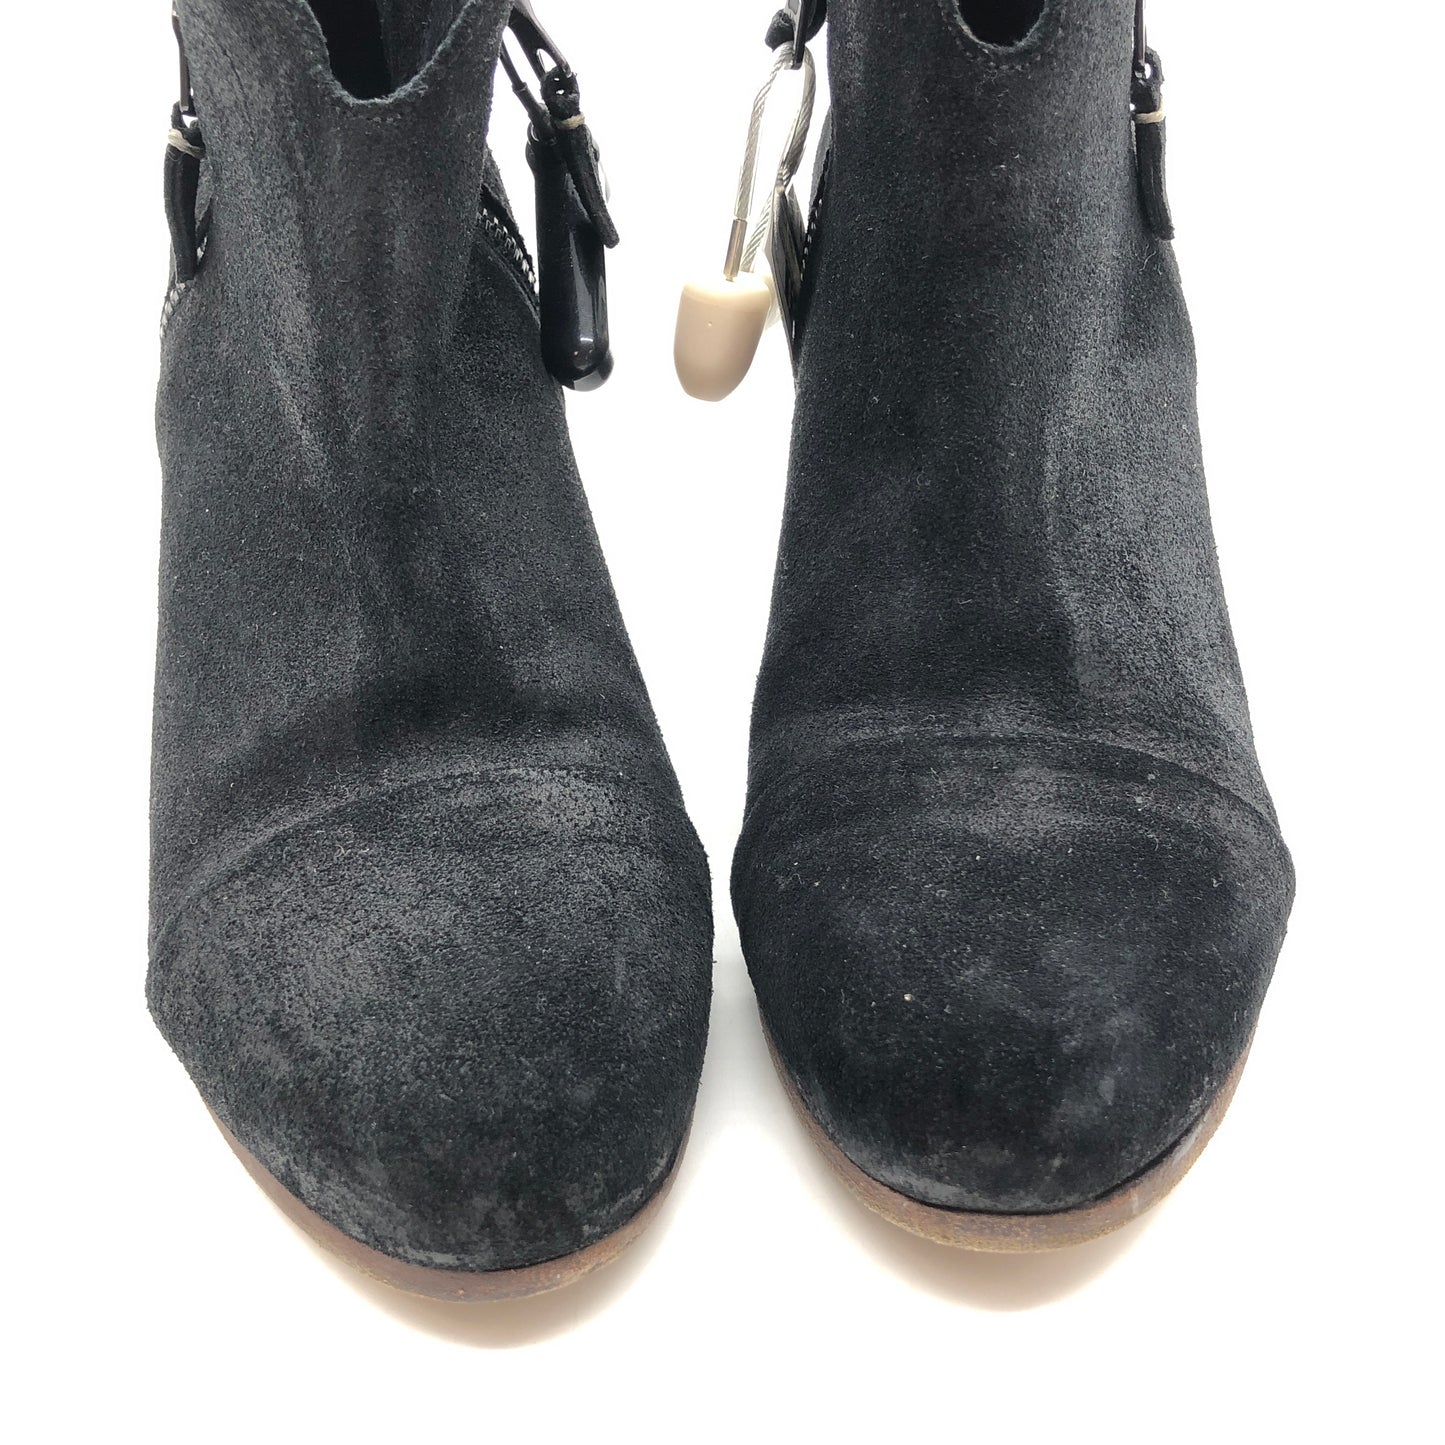 Boots Ankle Heels By Rag And Bone  Size: 5 | 36.5